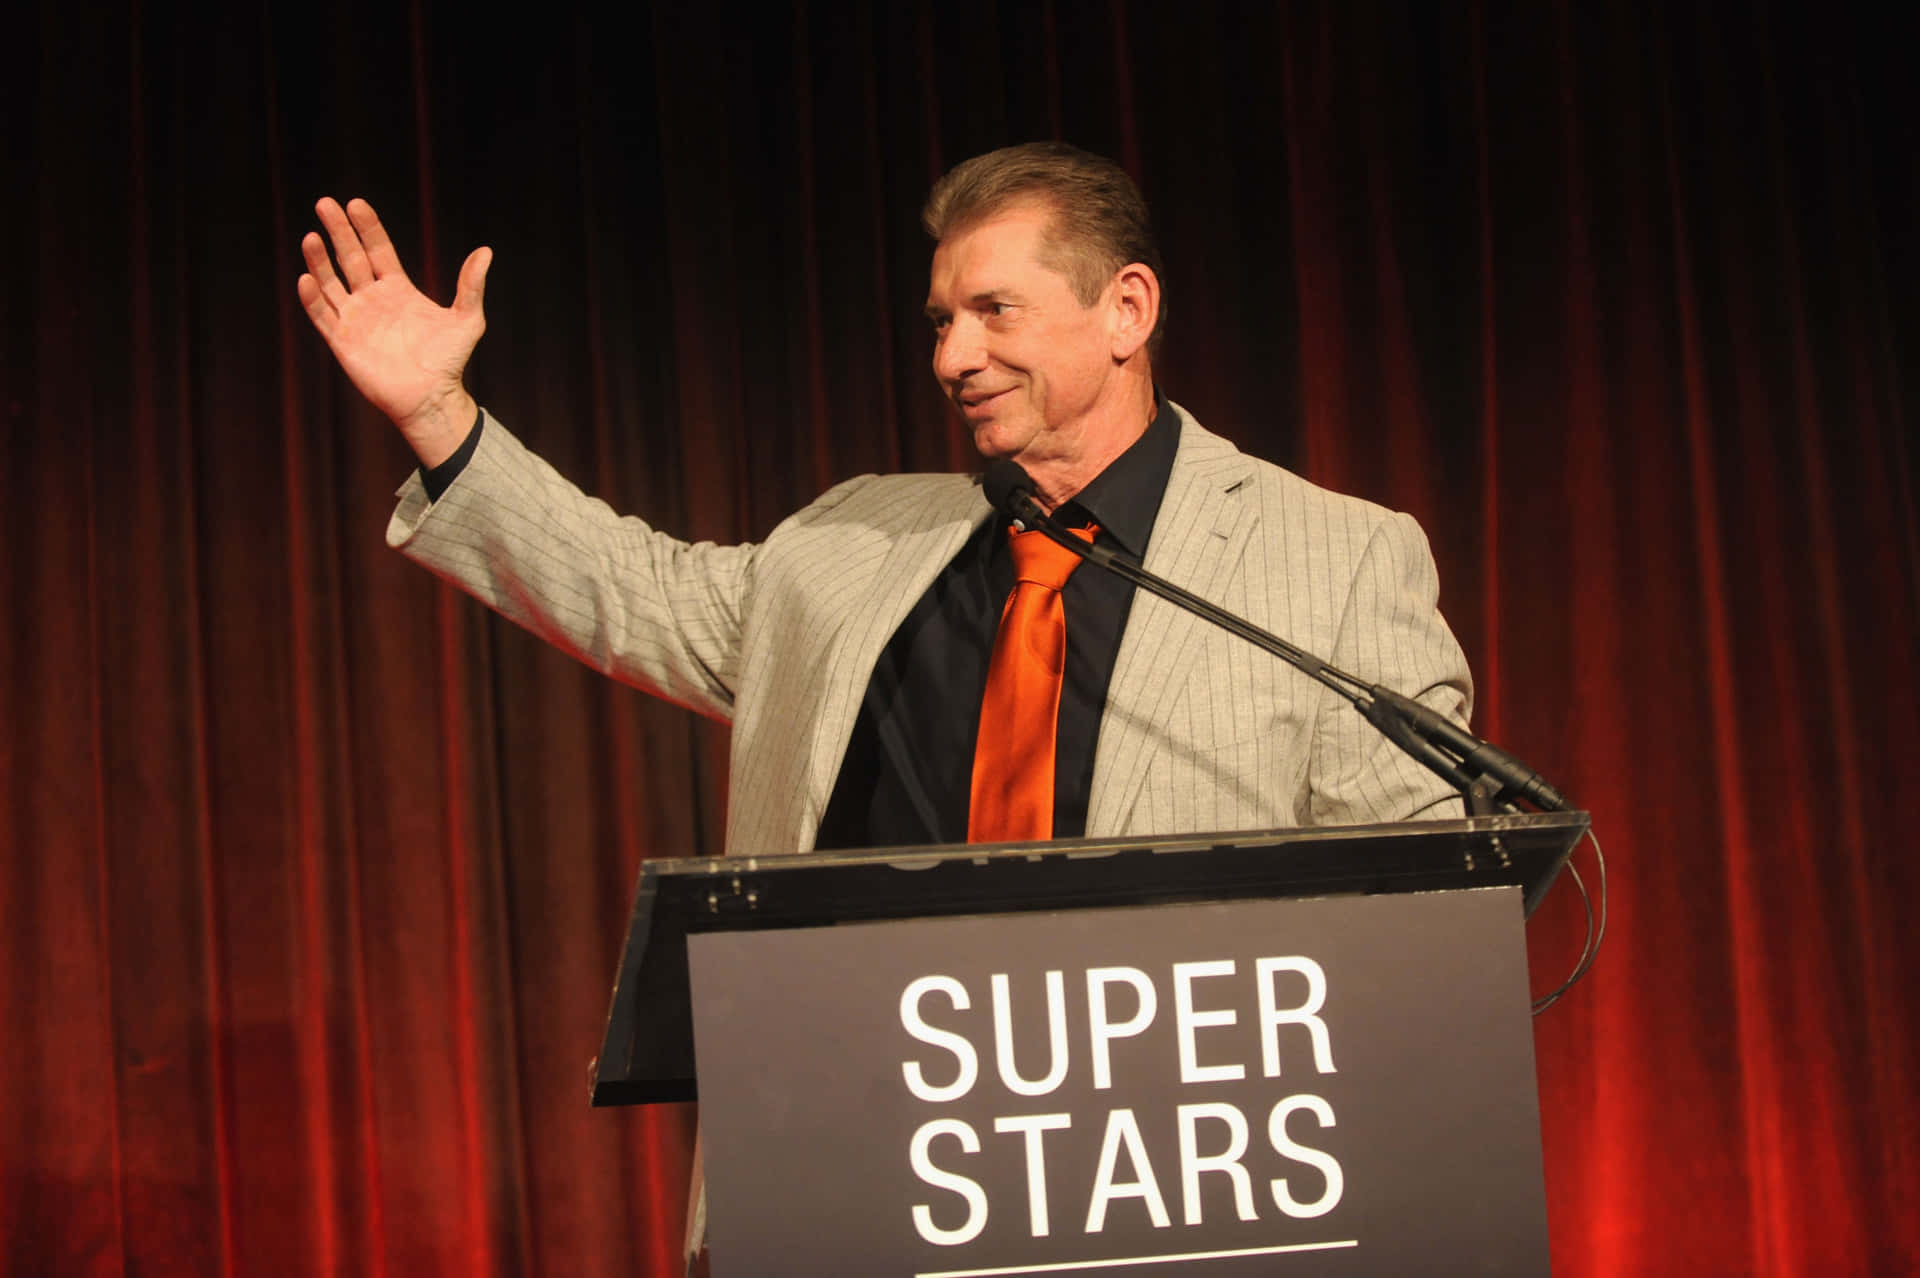 Wwe Vince Mcmahon During The Superstars Event